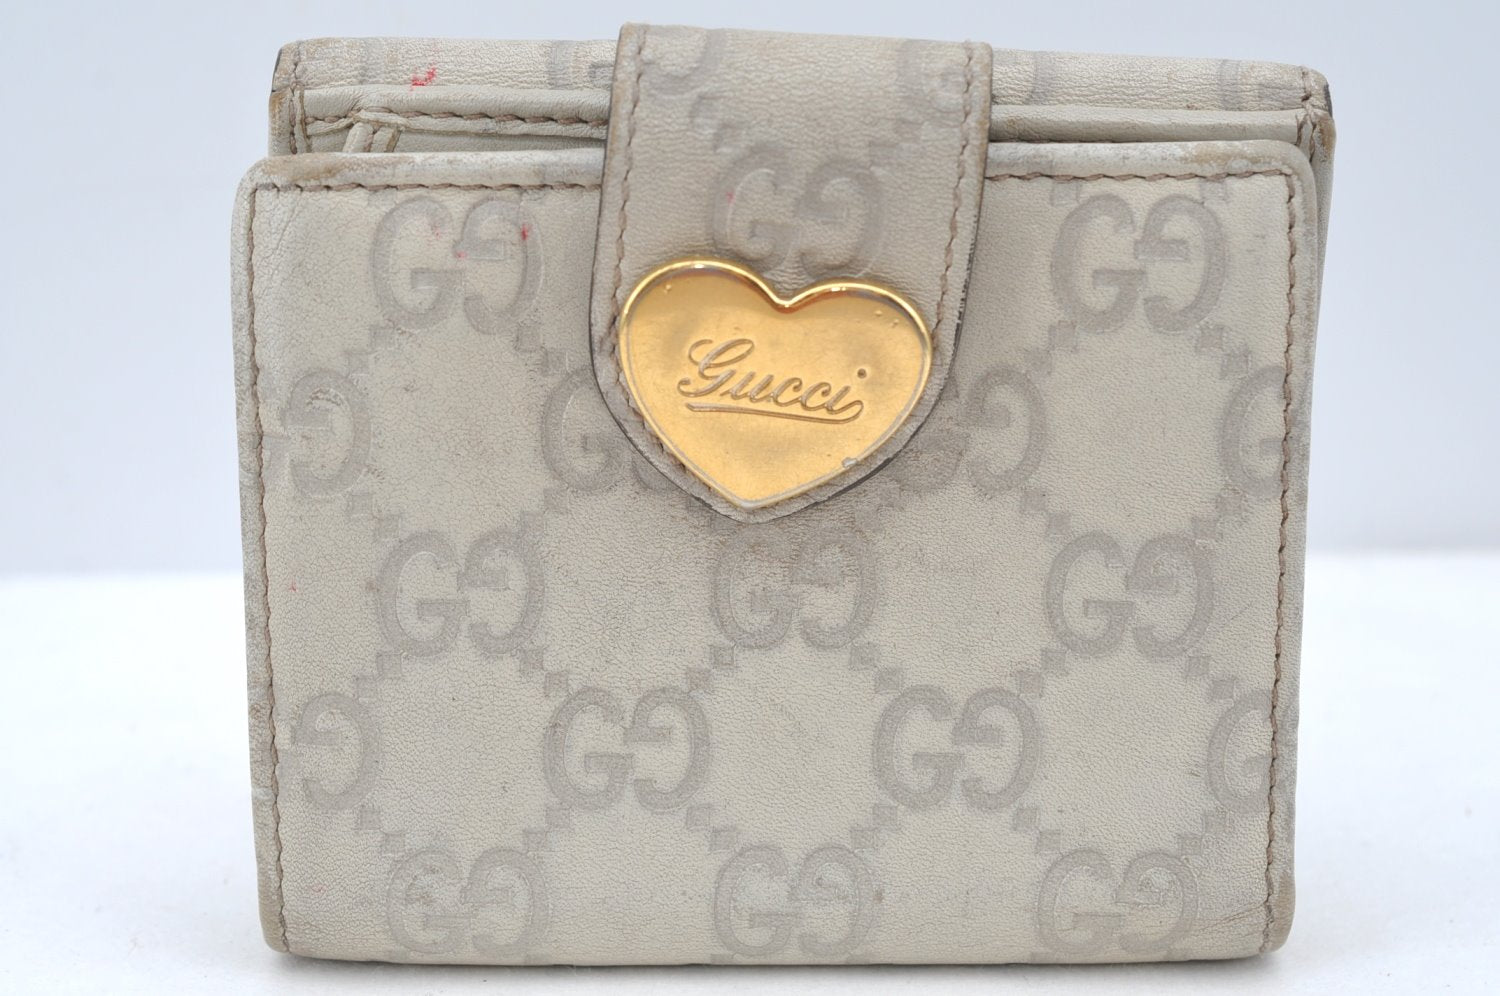 Auth GUCCI Lovely Heart Guccissima GG Leather Bifold Wallett 203548 White K4520